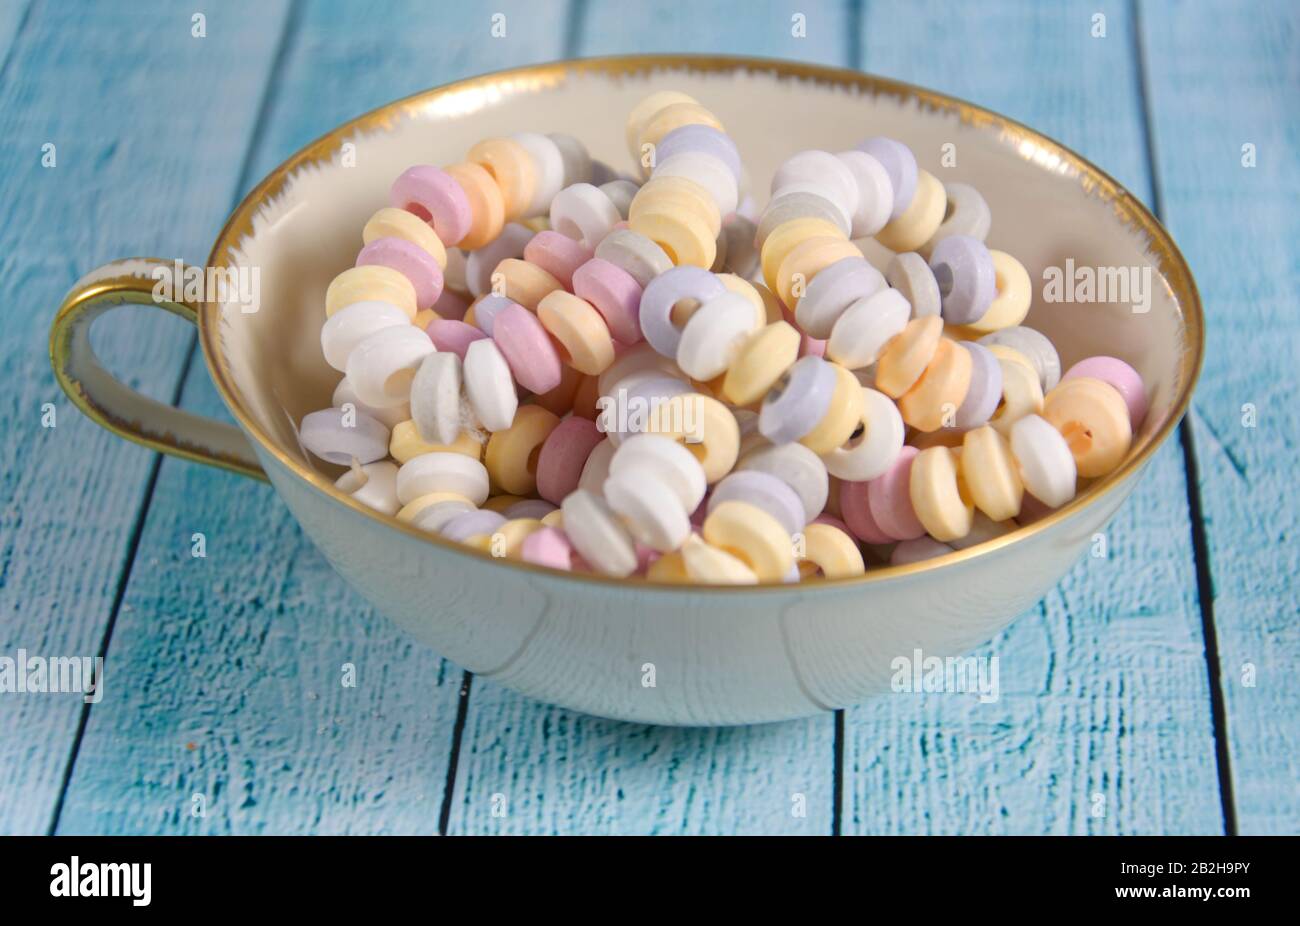 candy necklace Stock Photo